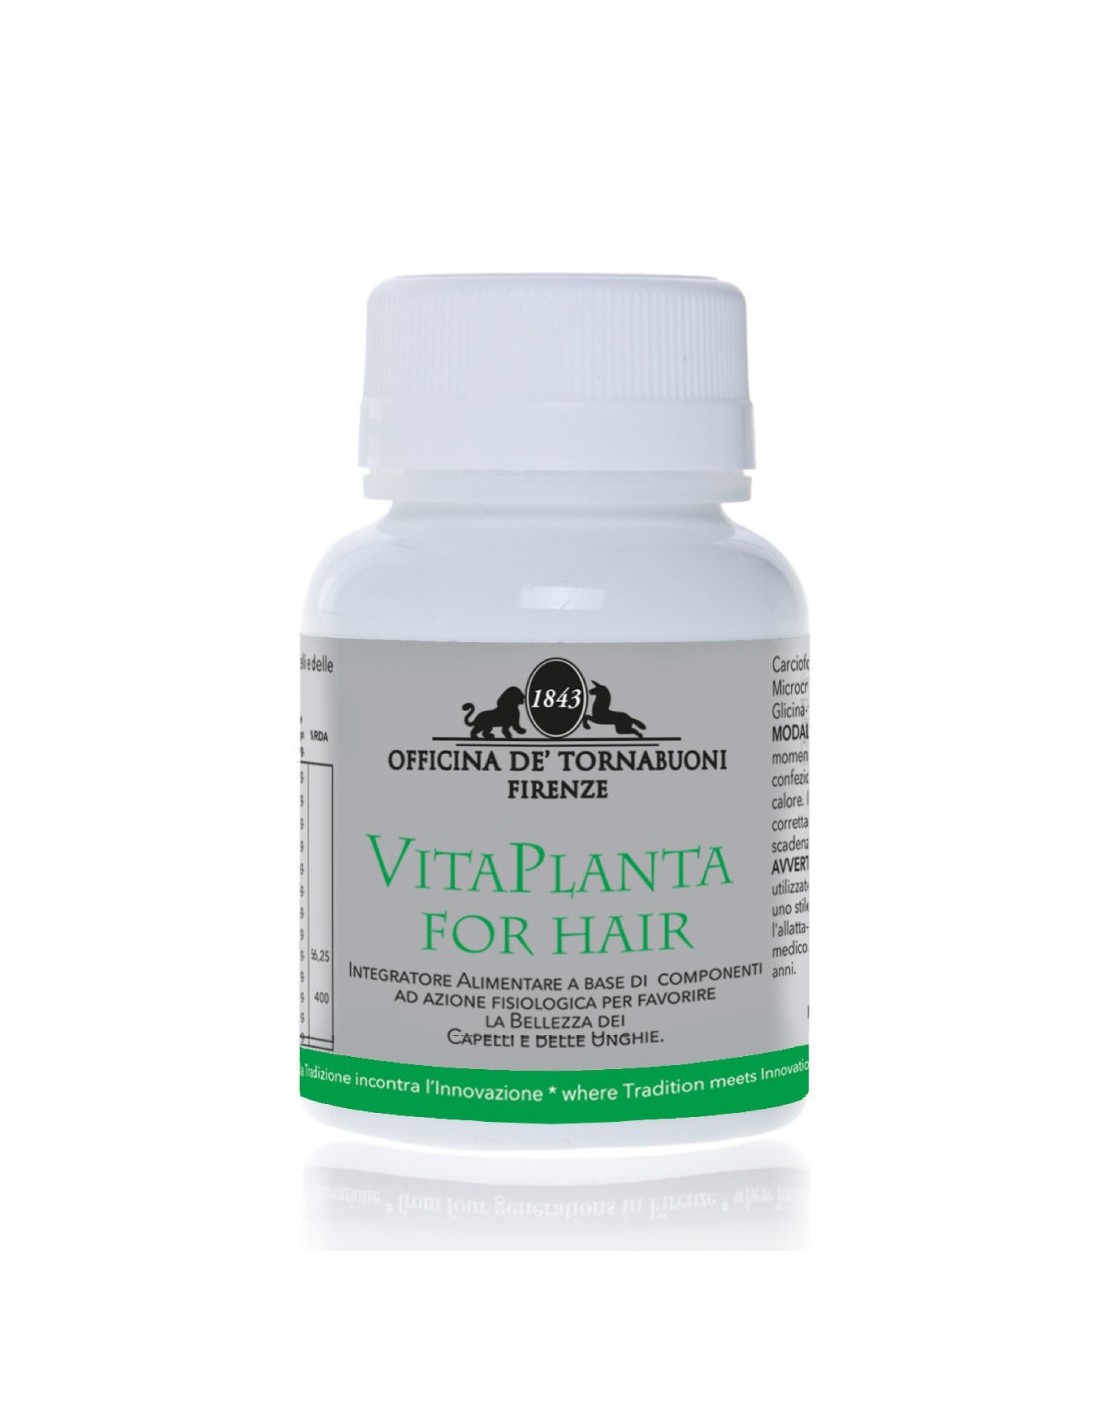 VitaPlanta for Hair - Fortifies the hair and nails